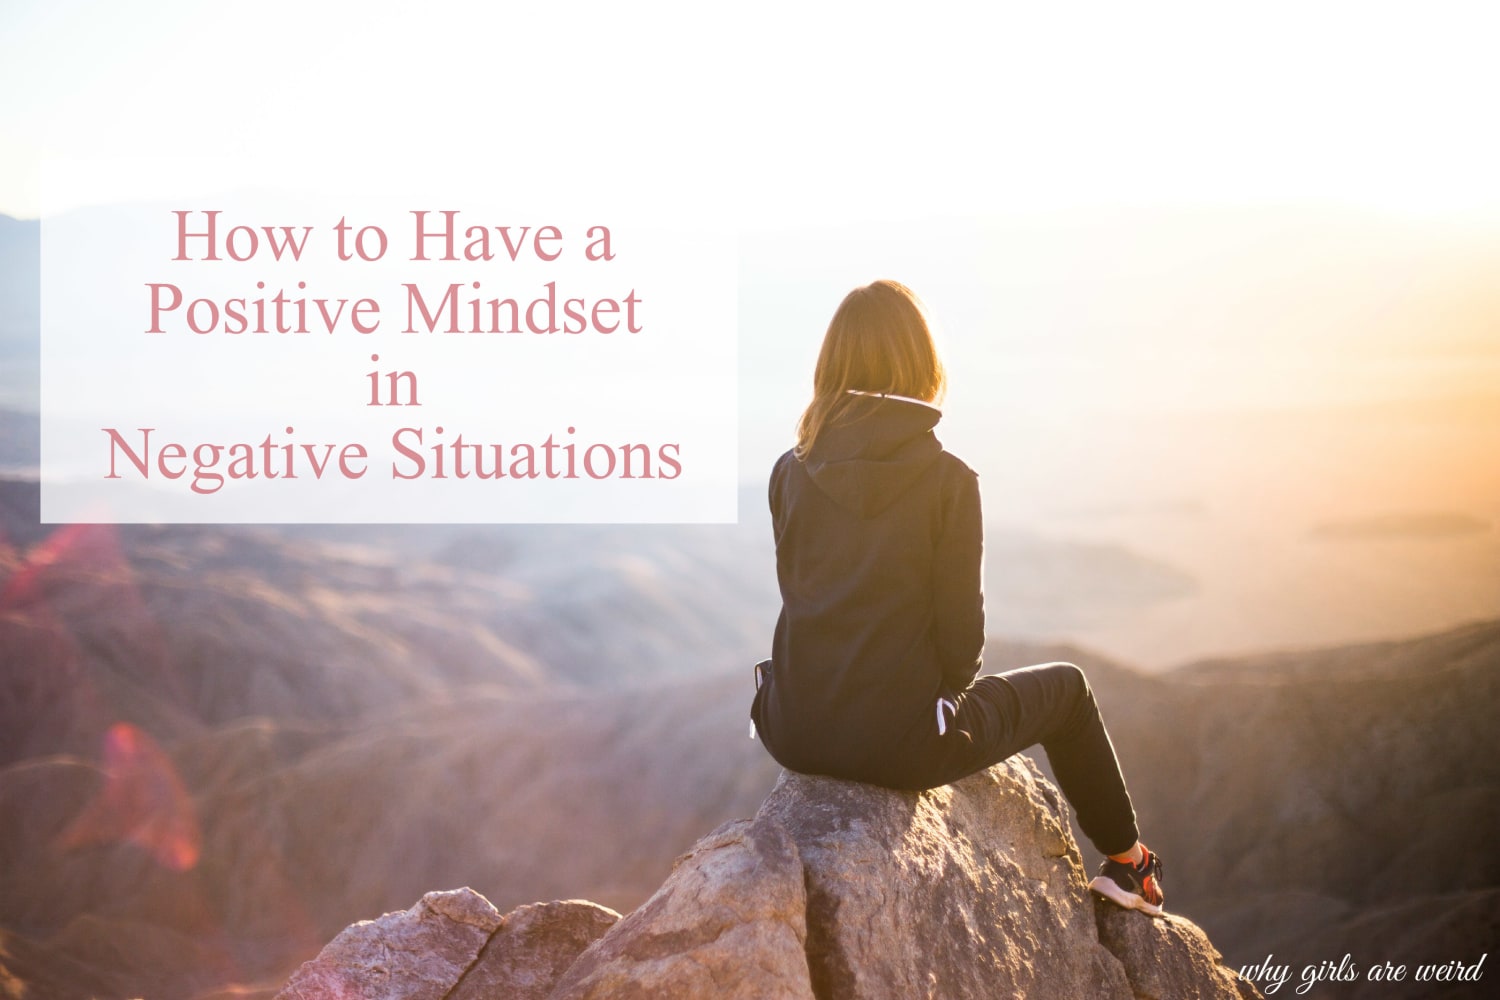 How to Have a Positive Mindset in Negative Situations